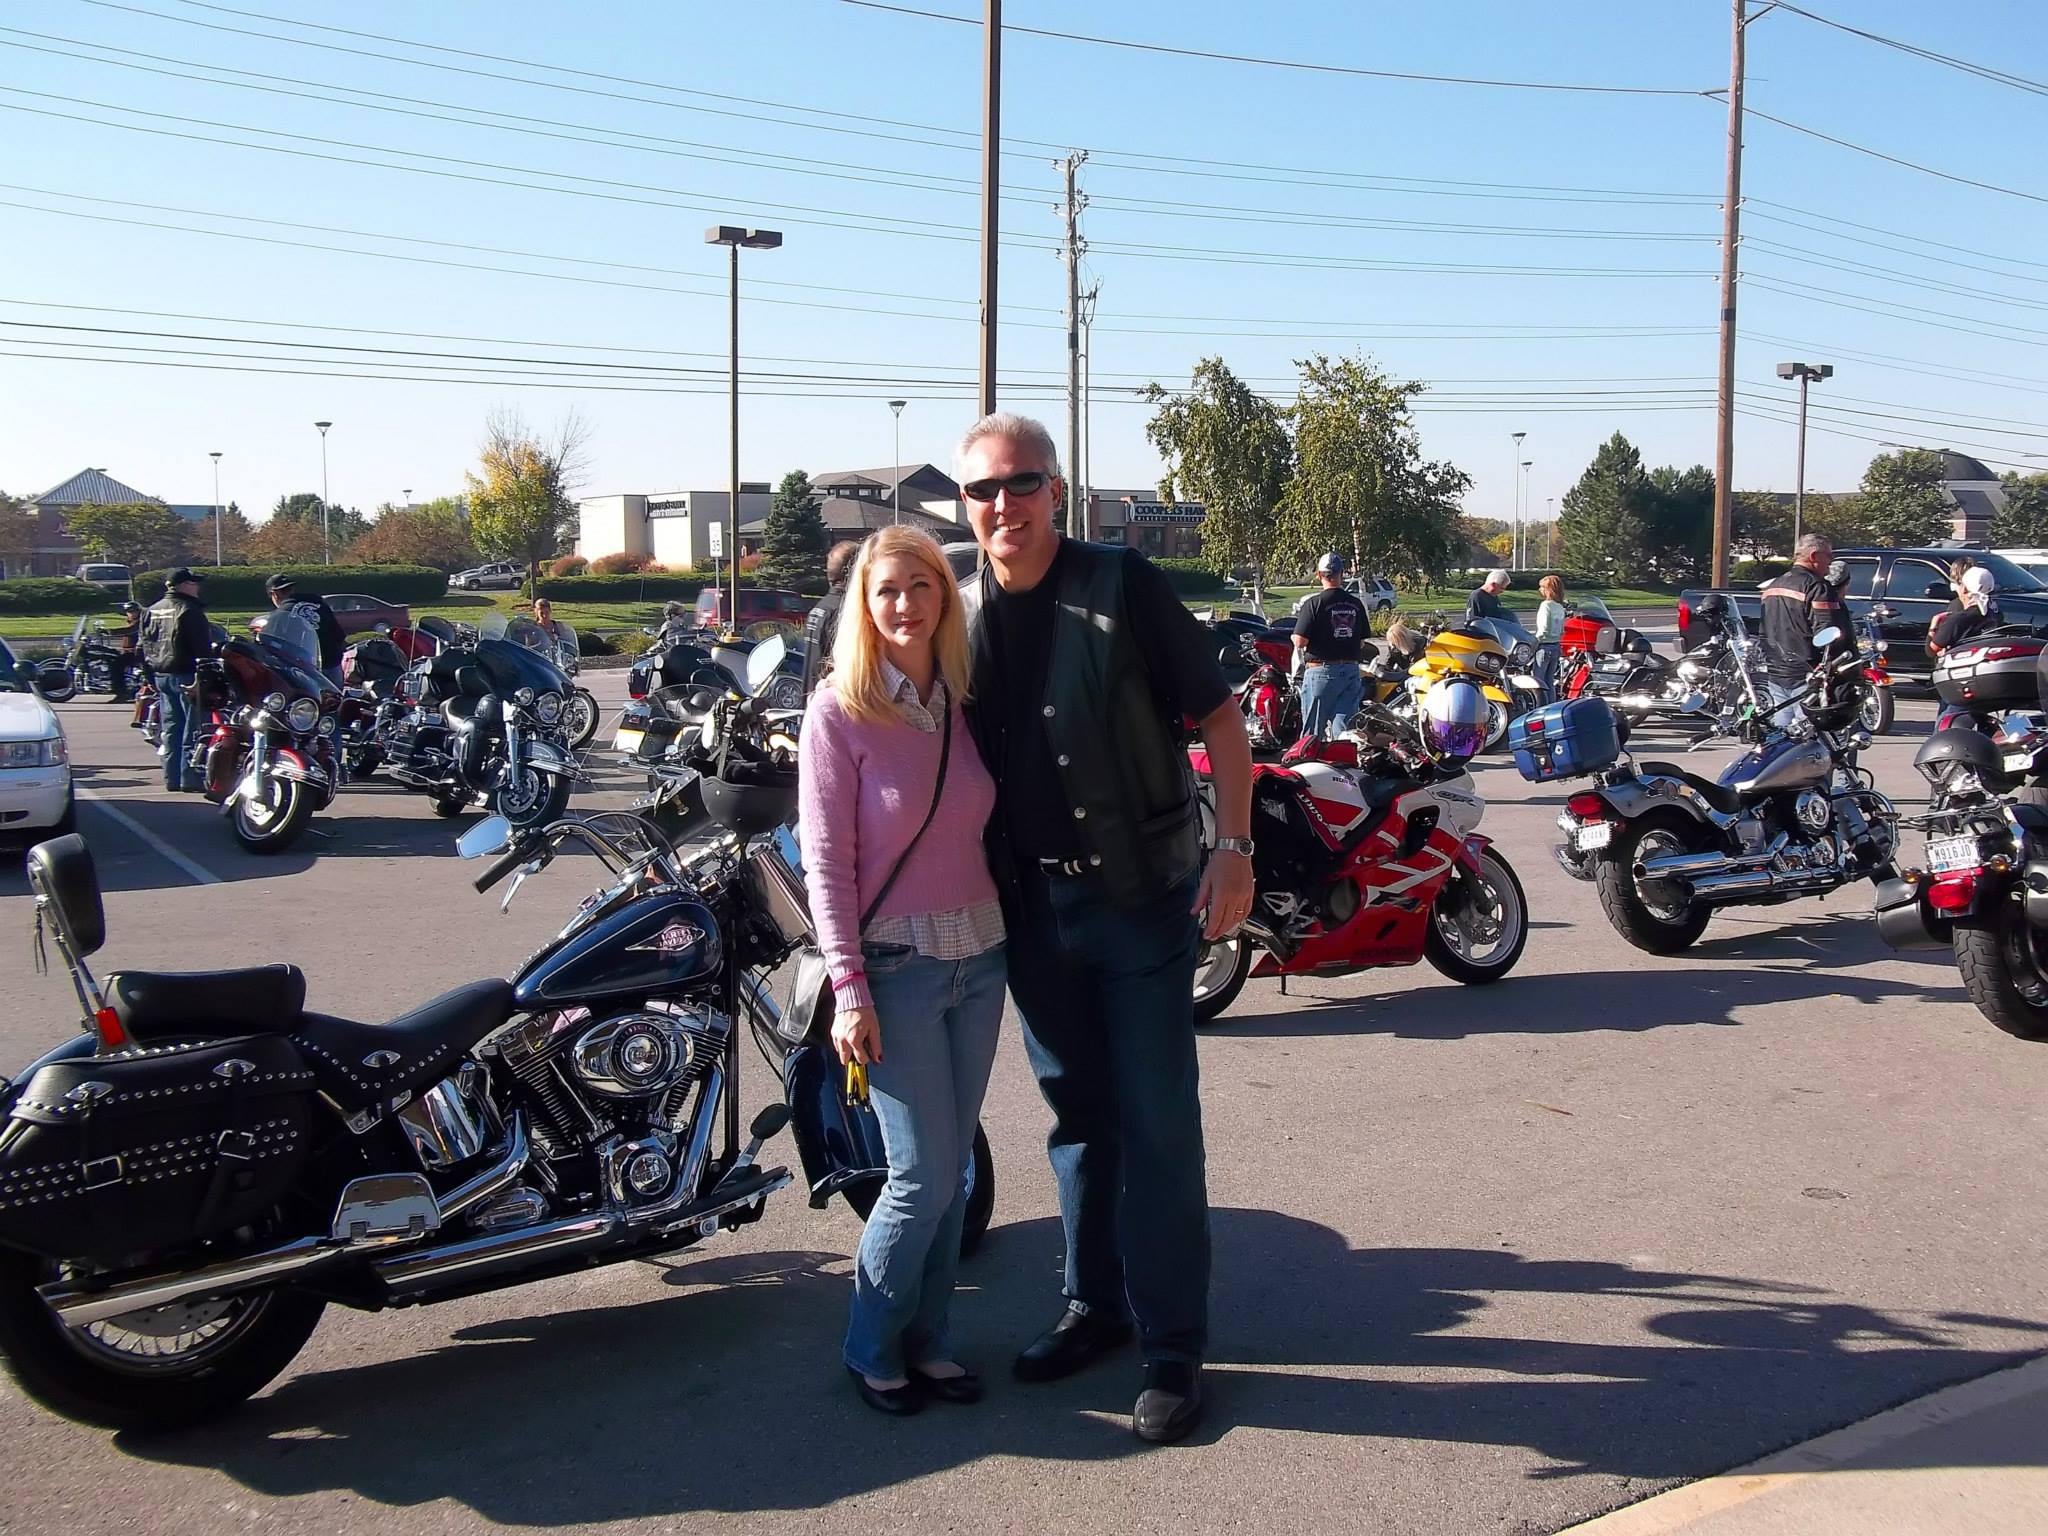 Amy Van Ostrand of Ladendorf Fregiato & Bigler and Mark Ladendorf at the "Rock for the Cure" ride to benefit breast cancer at Harley Davidson North in Indy. 